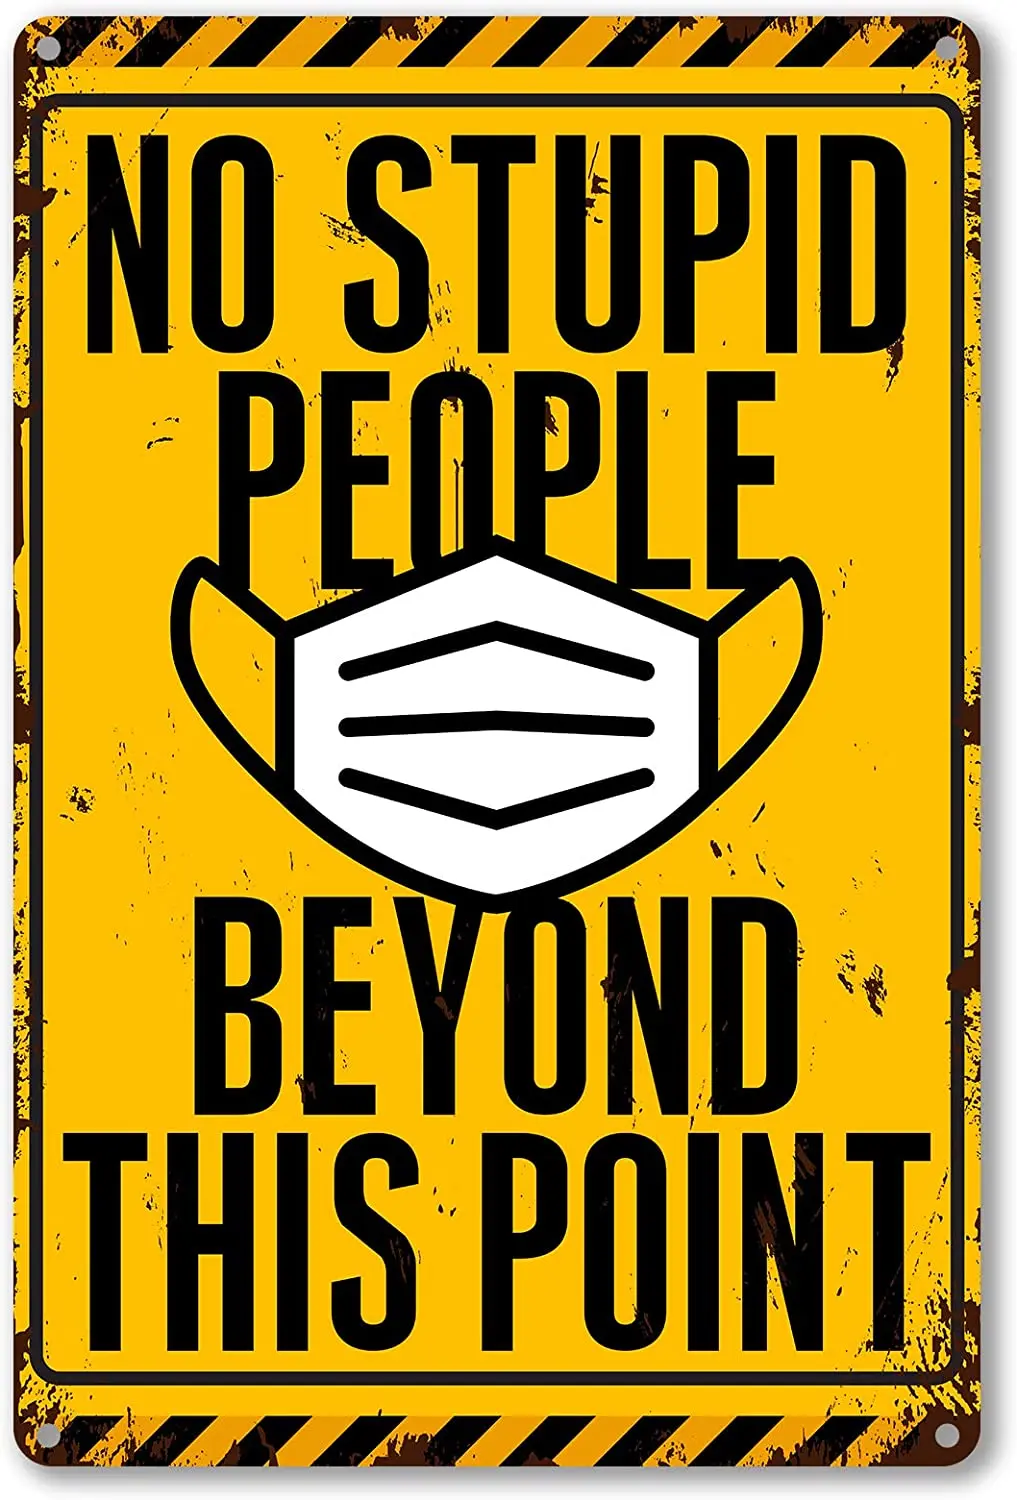 

Funny Quote No Stupid People Metal Tin Sign Wall Decor Vintage No Stupid People Beyond This Point Tin Sign for Bar Home Garage